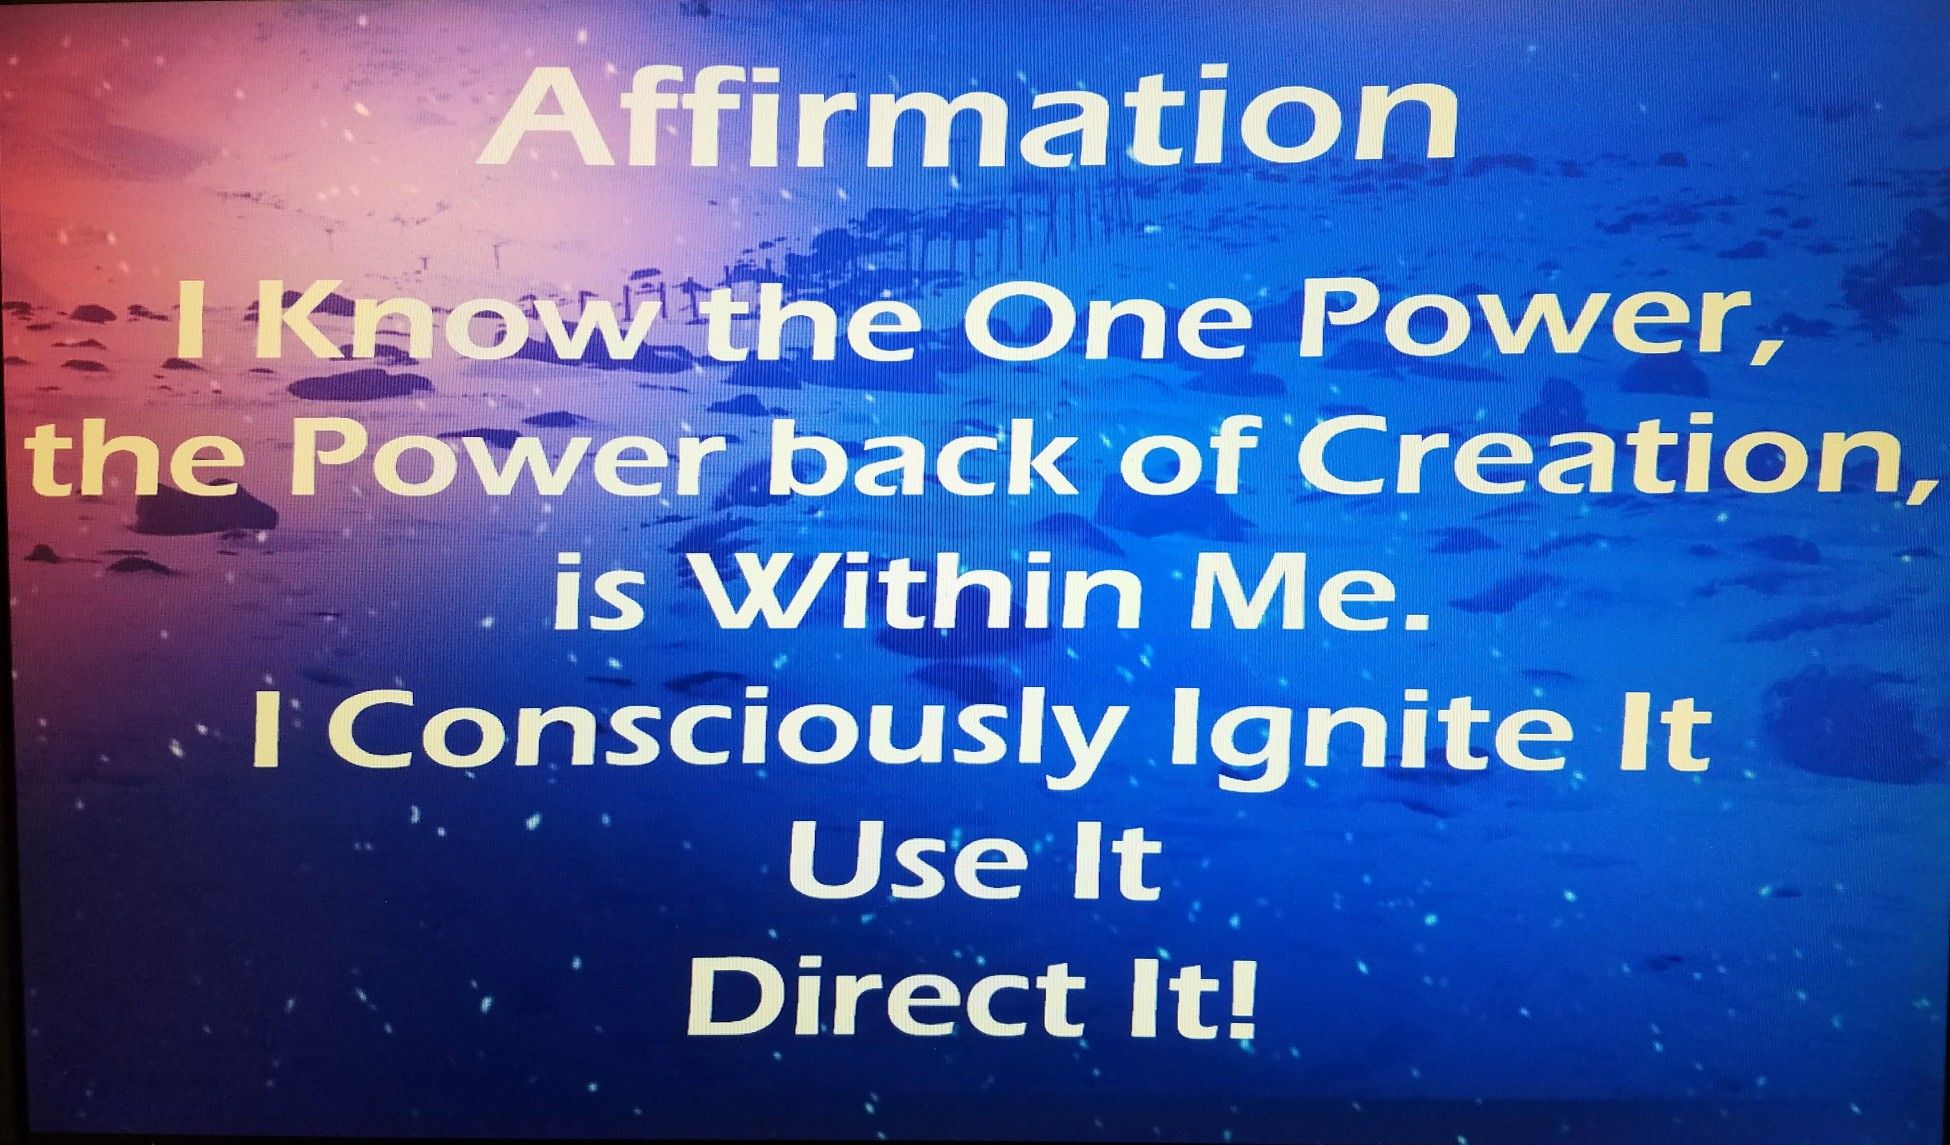 The Power of Nurturing Your Soul with Spiritual Affirmations